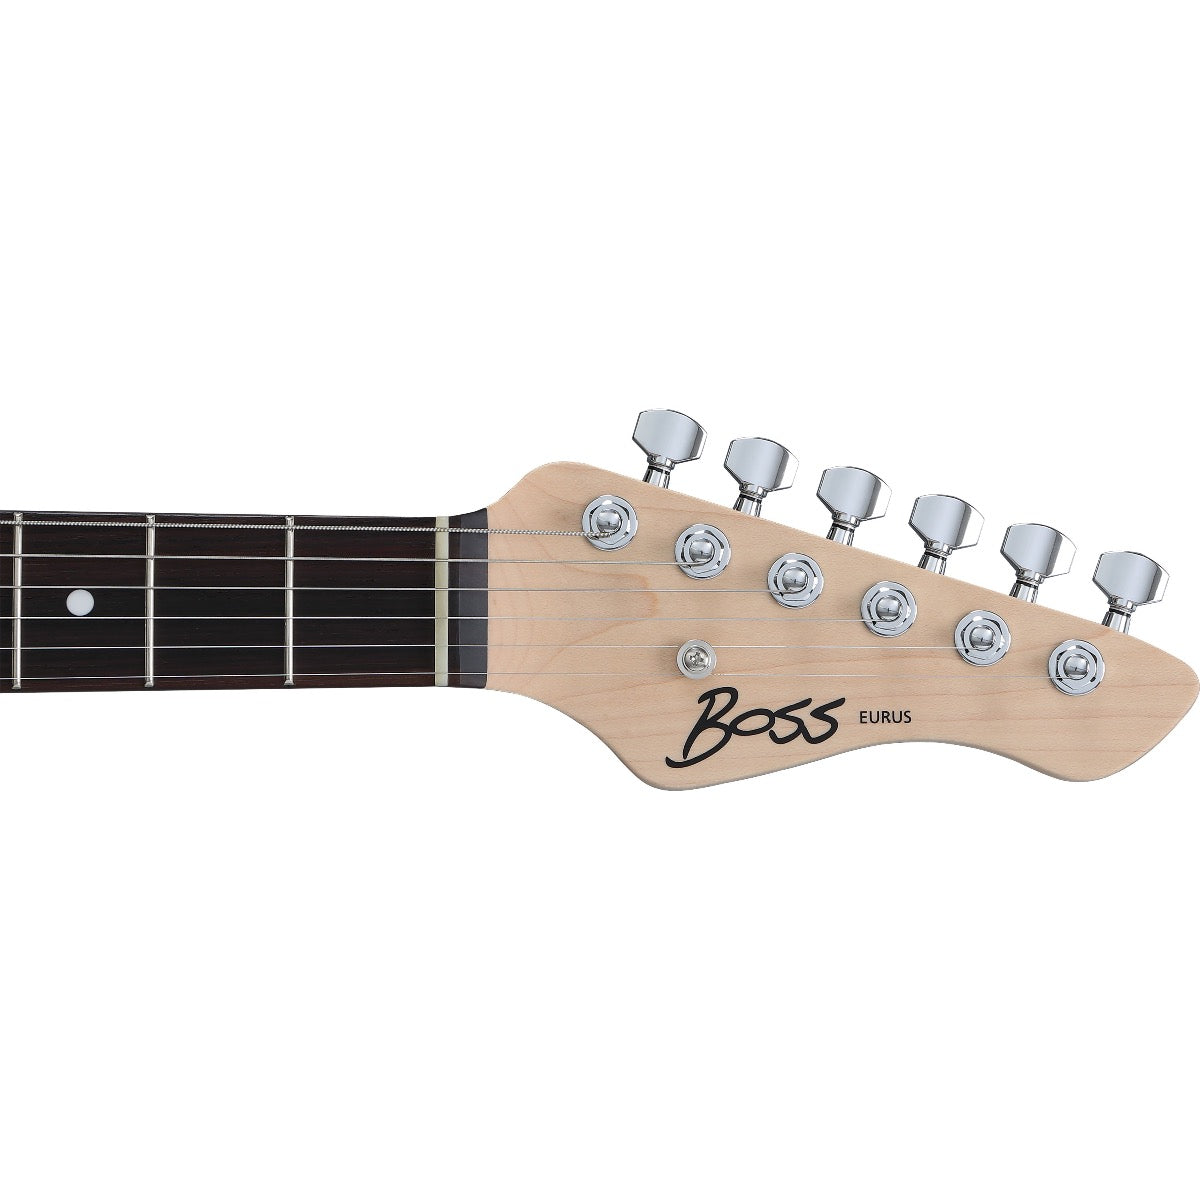 Detail view of Boss Eurus GS-1 Electronic Guitar - Black showing top of headstock and portion of fretboard